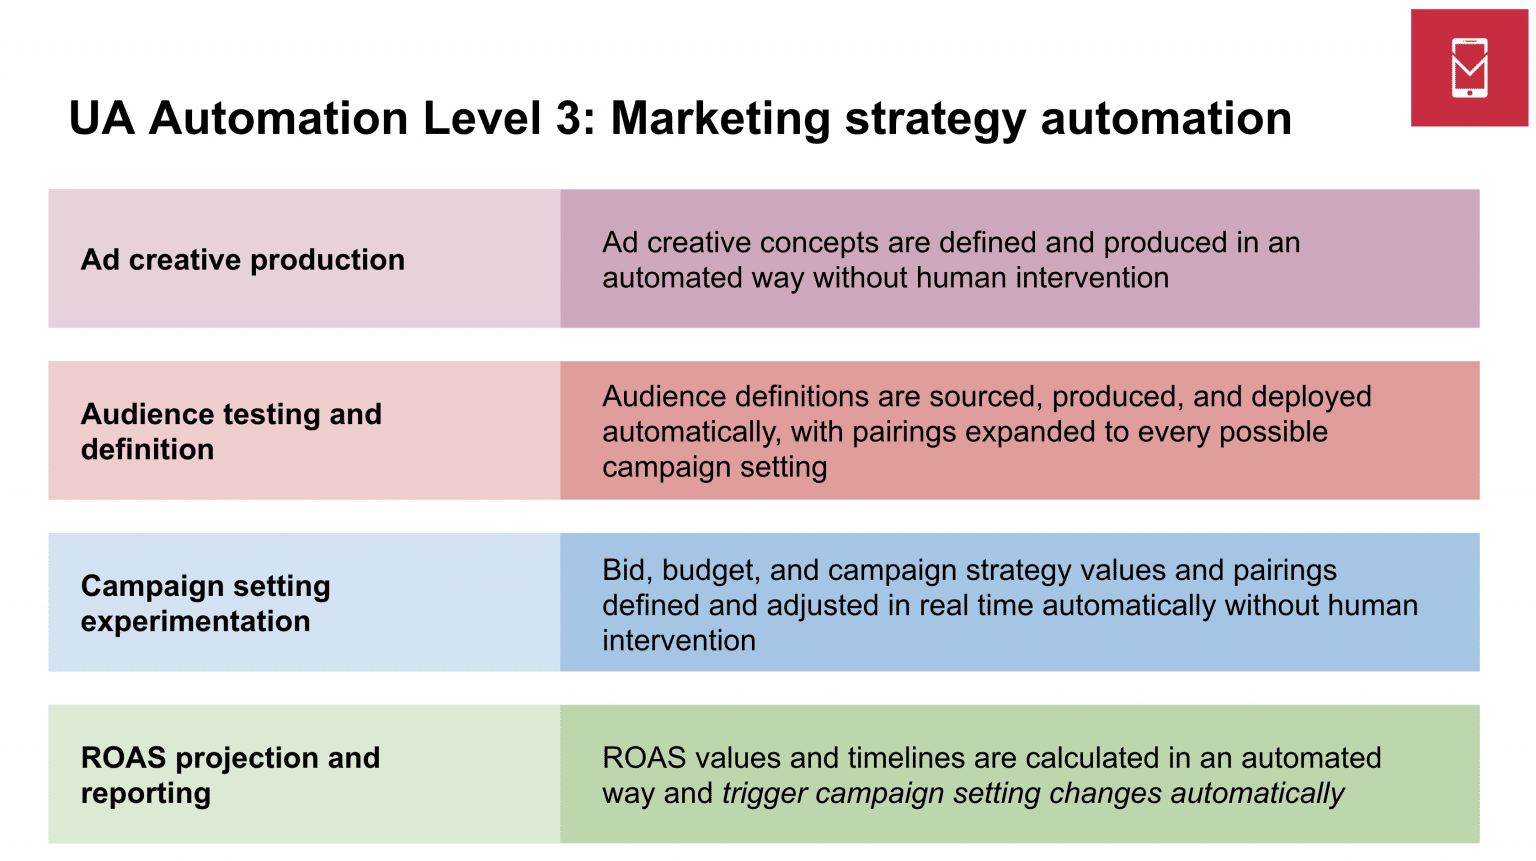 Credit: MobileDevMemo's  UA Automation Level 3 by Eric Seufert